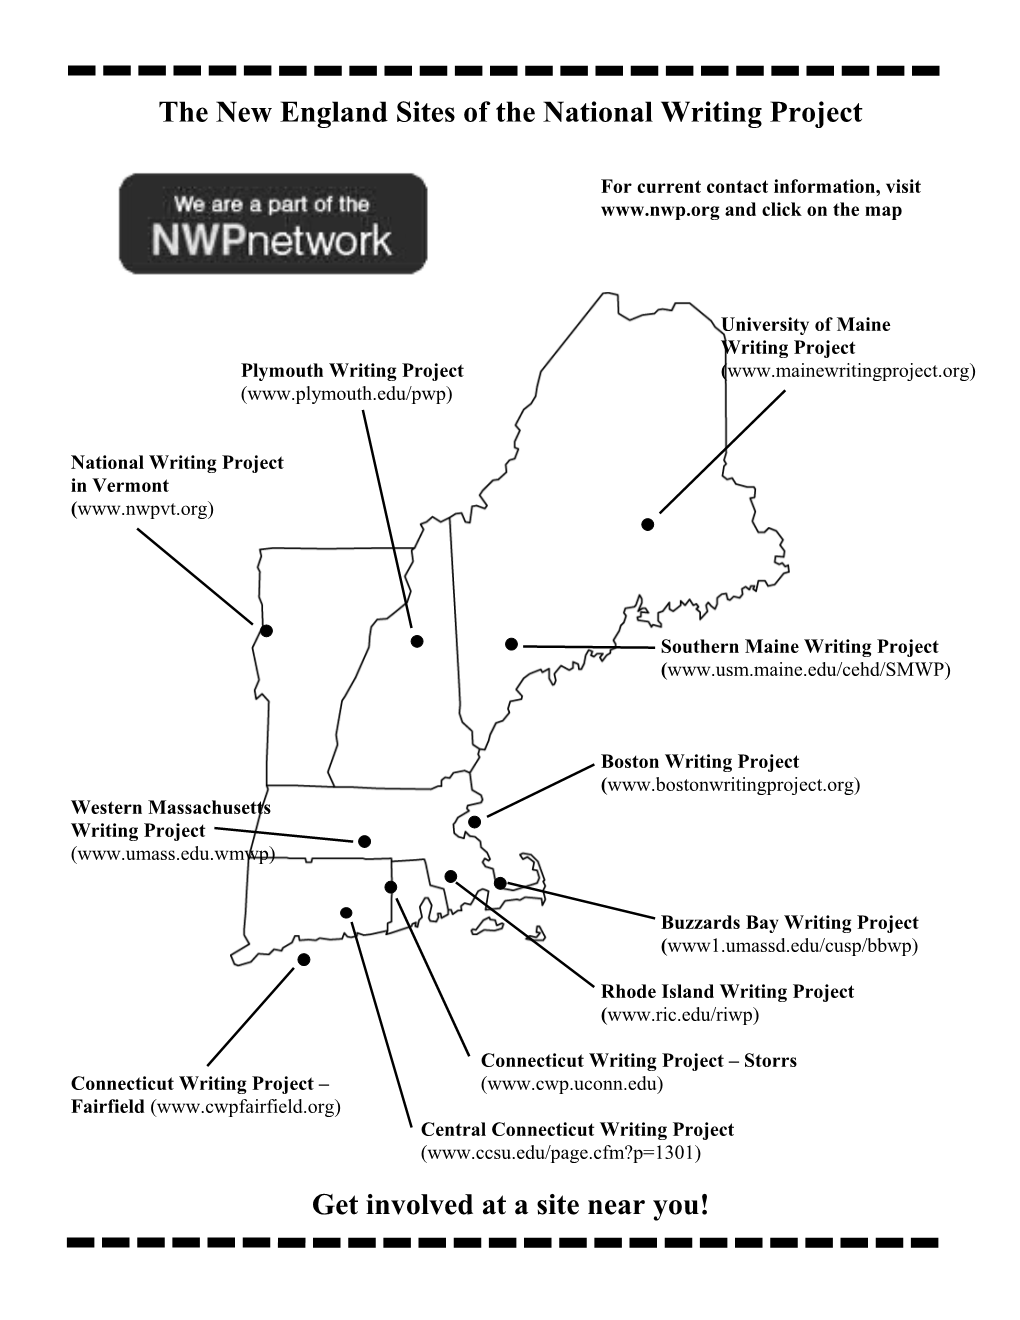 The New England Sites of the National Writing Project